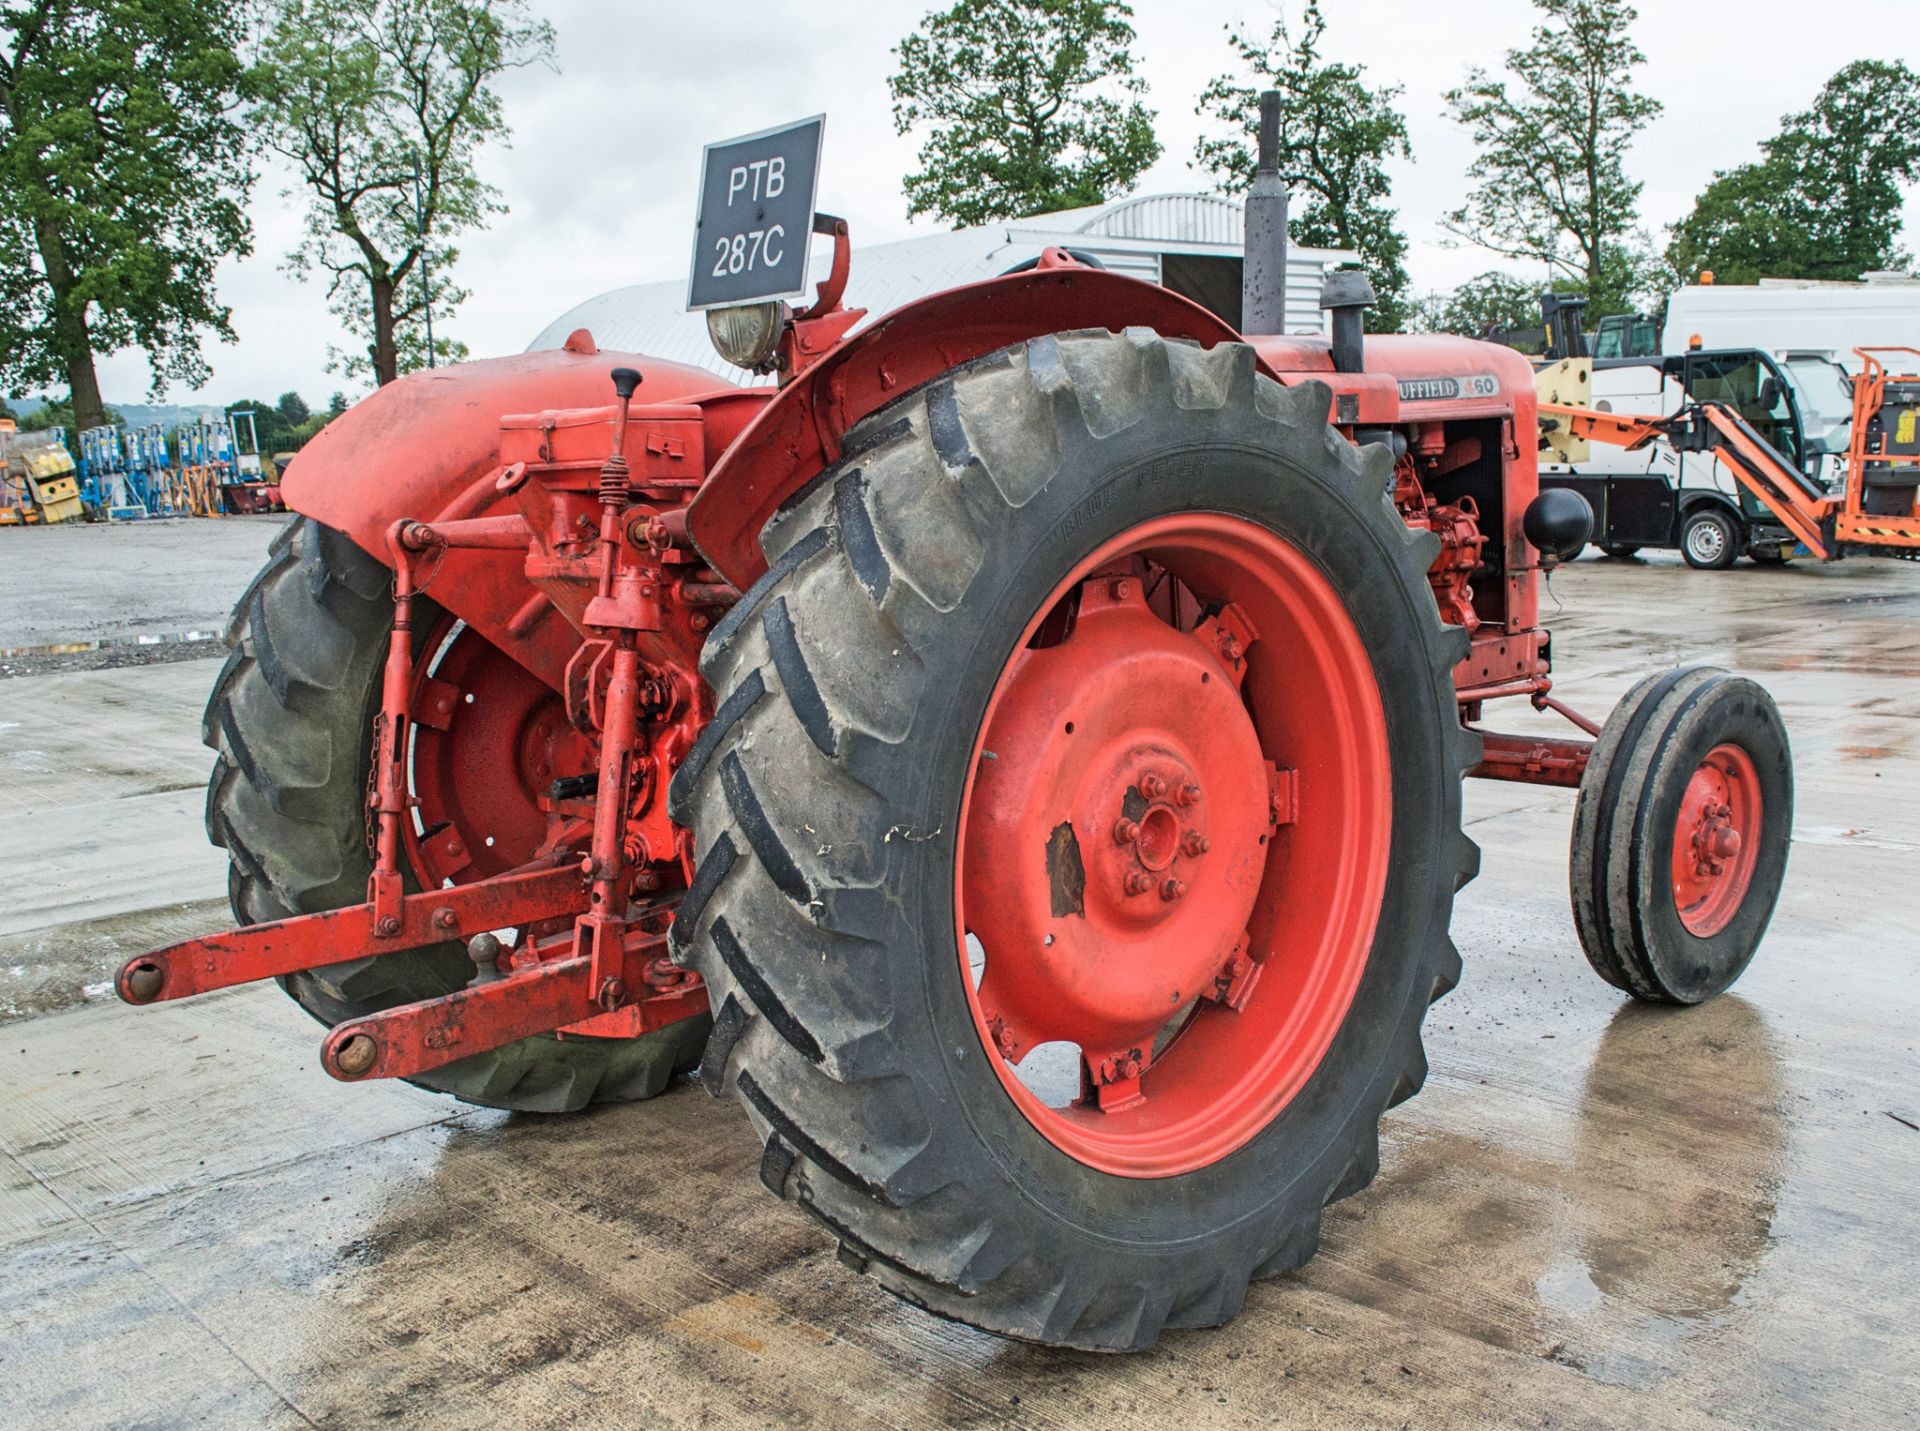 Nuffield 460 2 wheel drive diesel driven tractor  Reg Number: PTB 287C  S/N: 60B 1500 57042 - Image 3 of 16